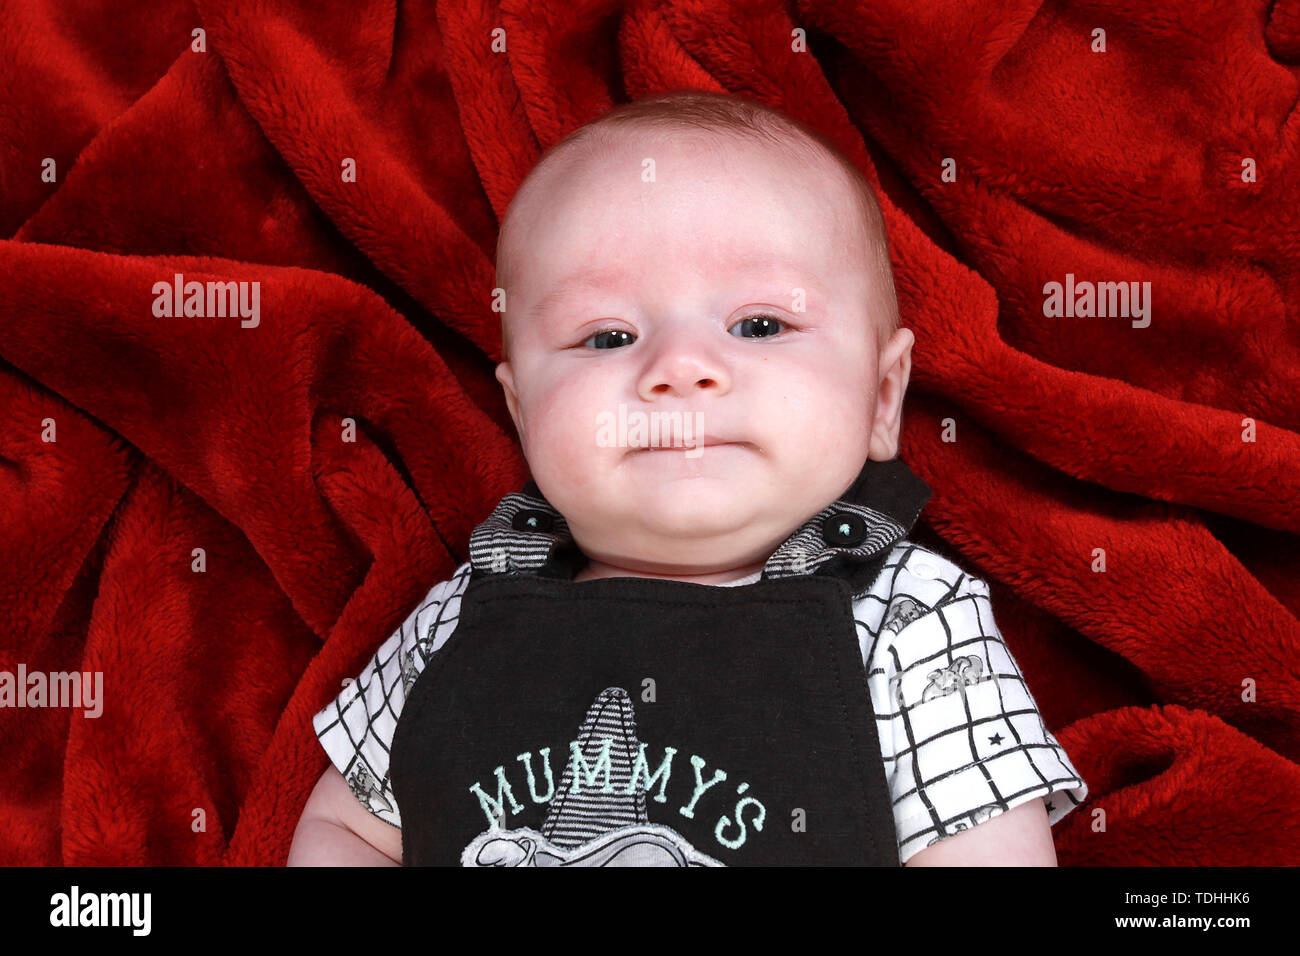 3 month old baby boy Stock Photo - Alamy